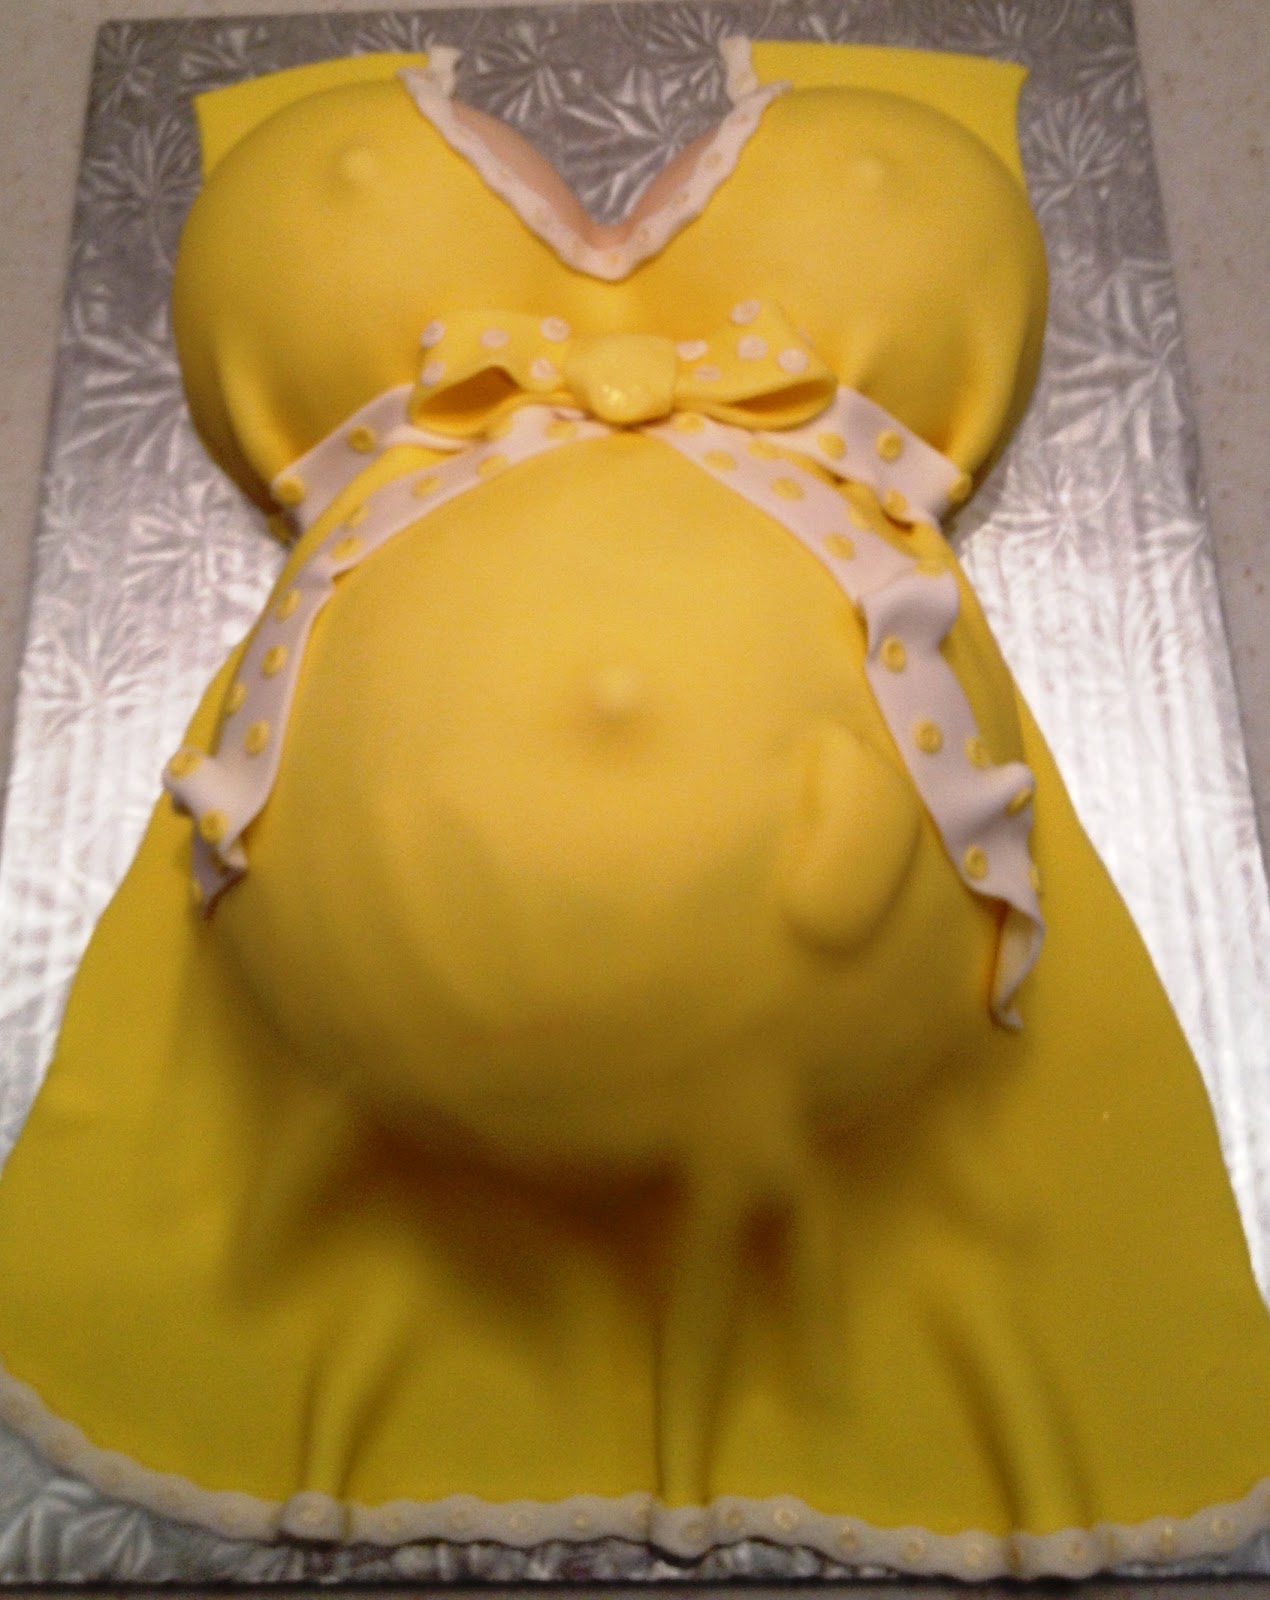 Pregnant Belly Cakes – Decoration Ideas